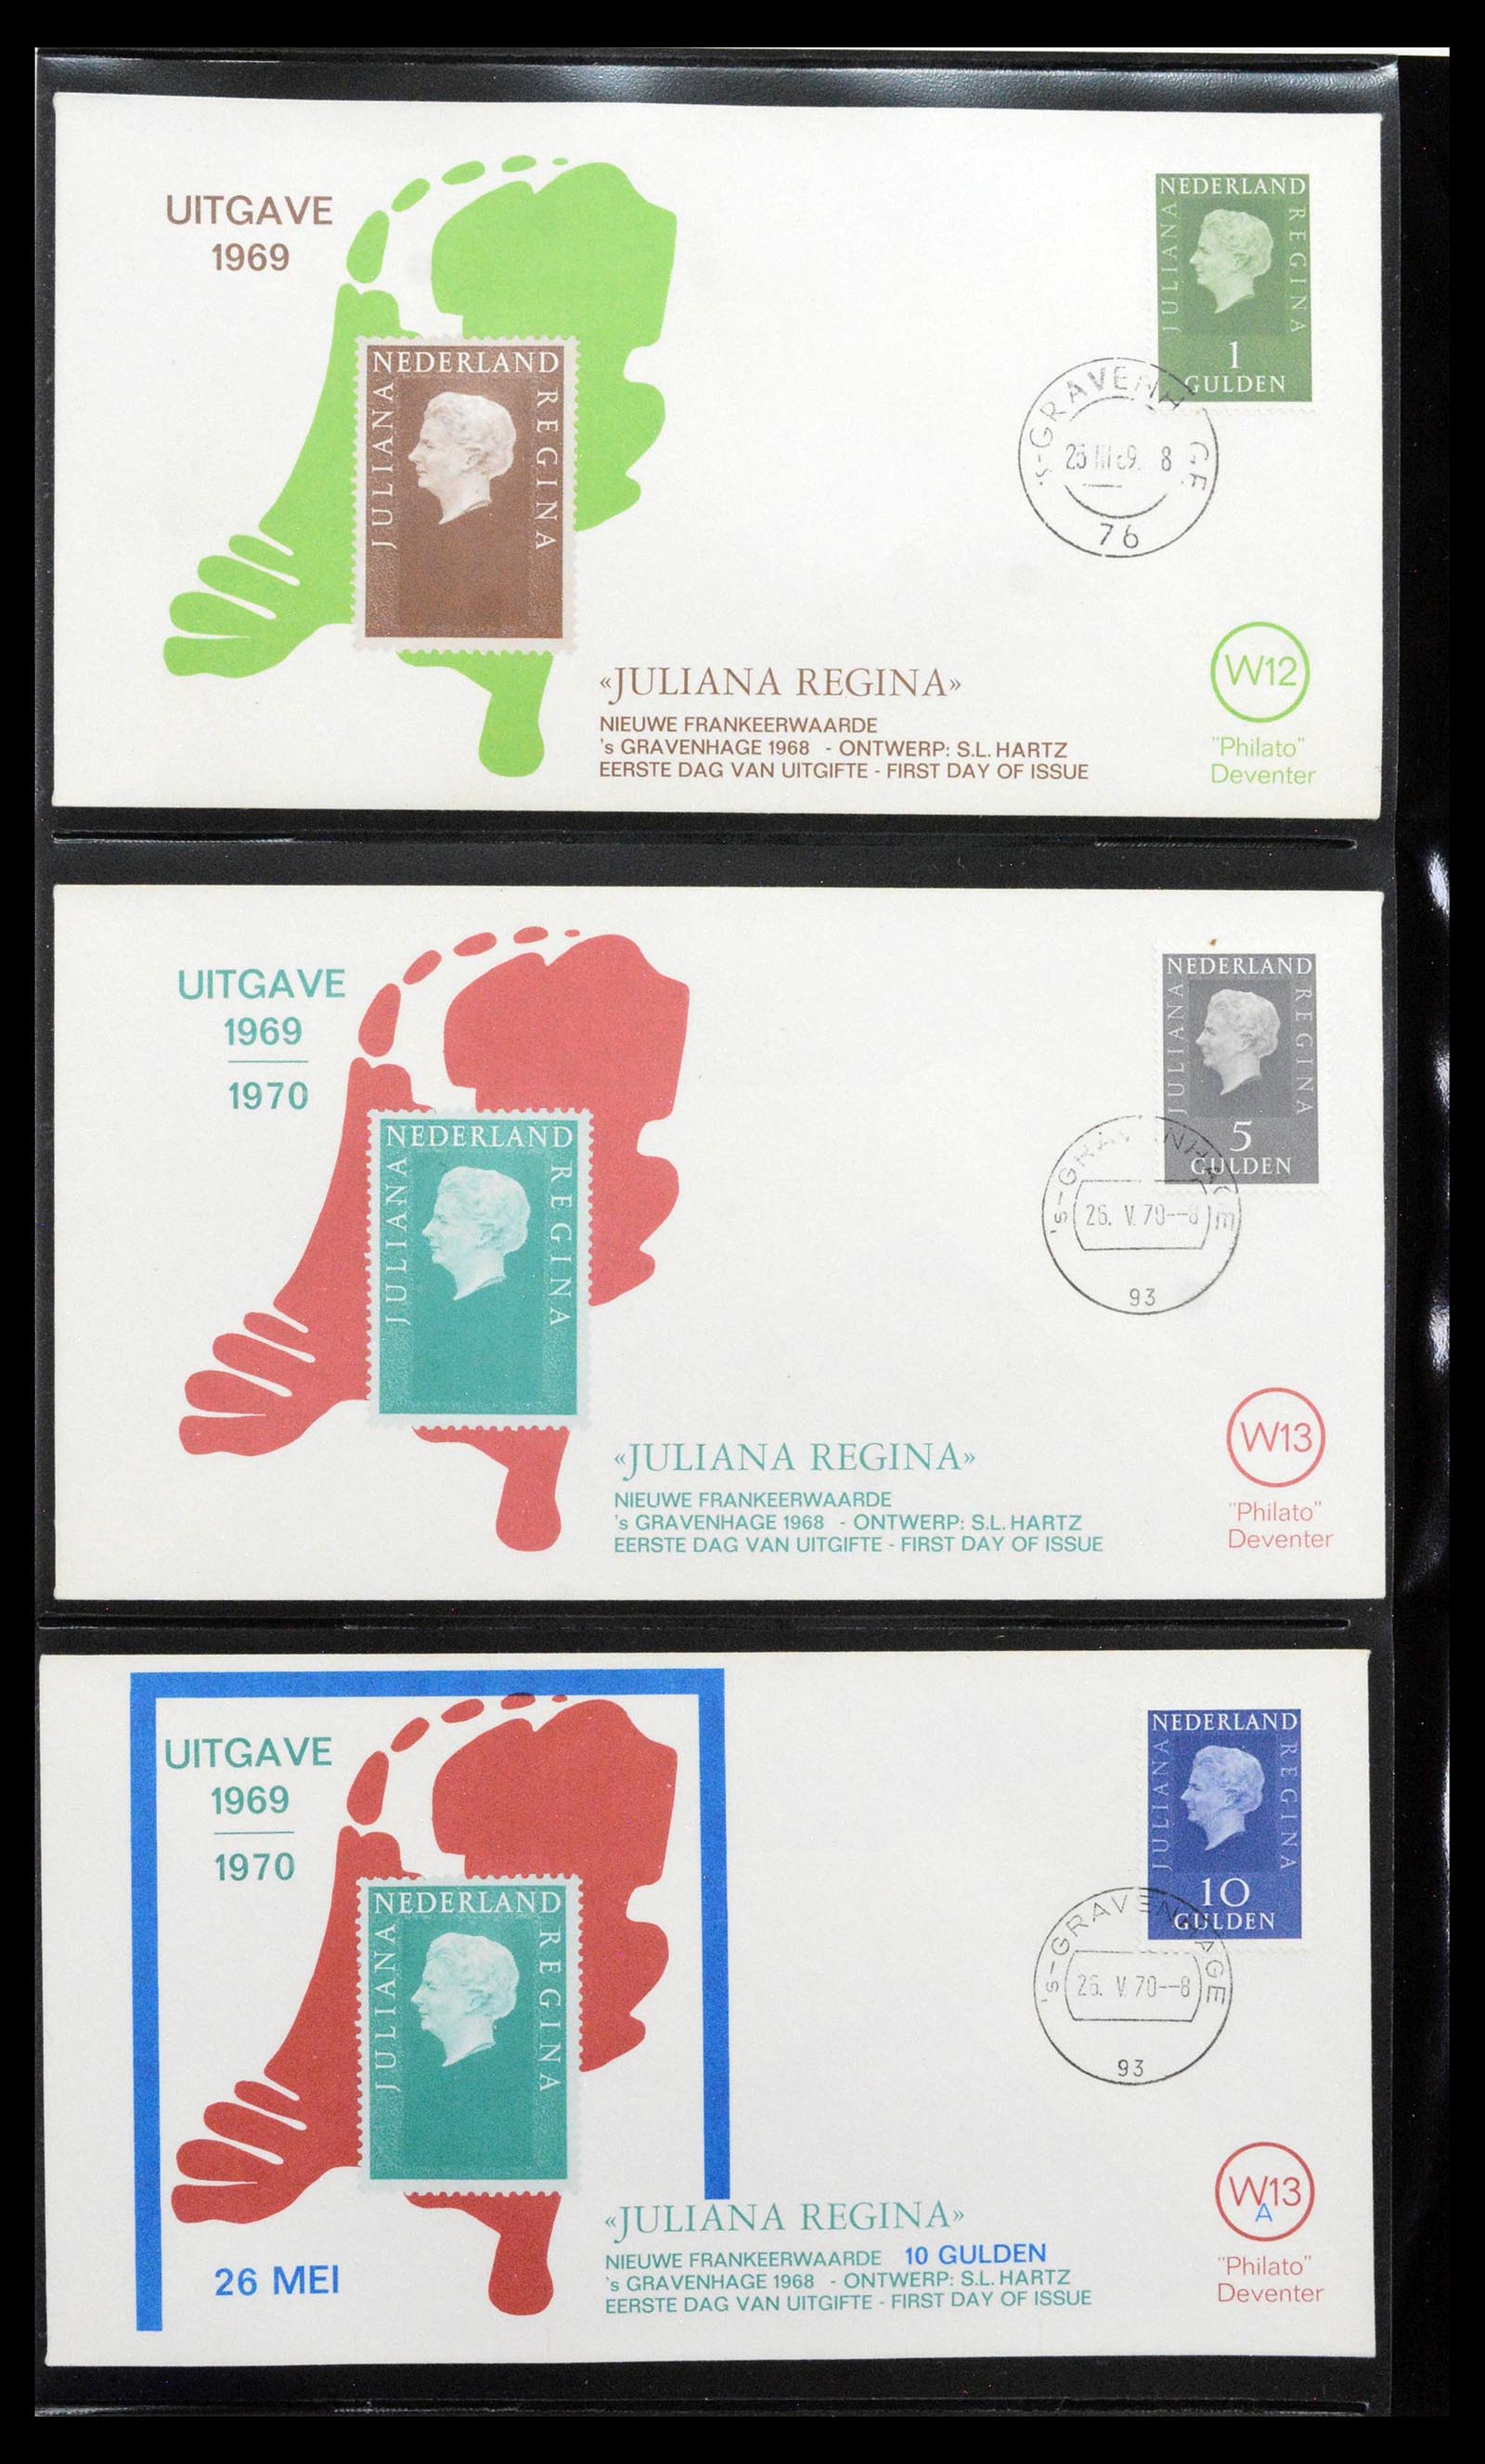 38559 0004 - Stamp collection 38559 Netherlands special first day covers.